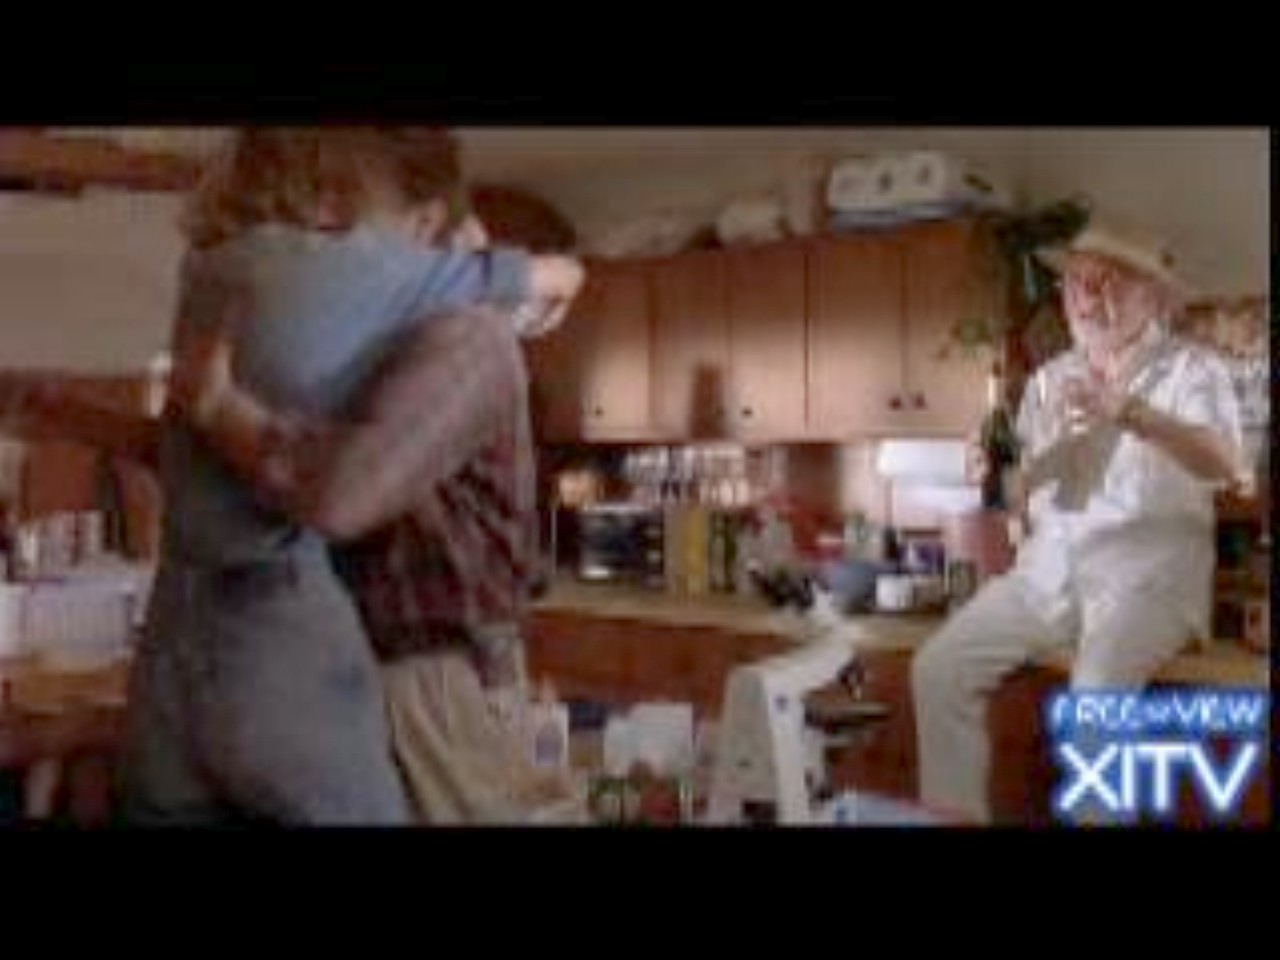 Watch Now! XITV FREE <> VIEW™ JURASSIC PARK! Starring Laura Dern! XITV Is Must See TV!